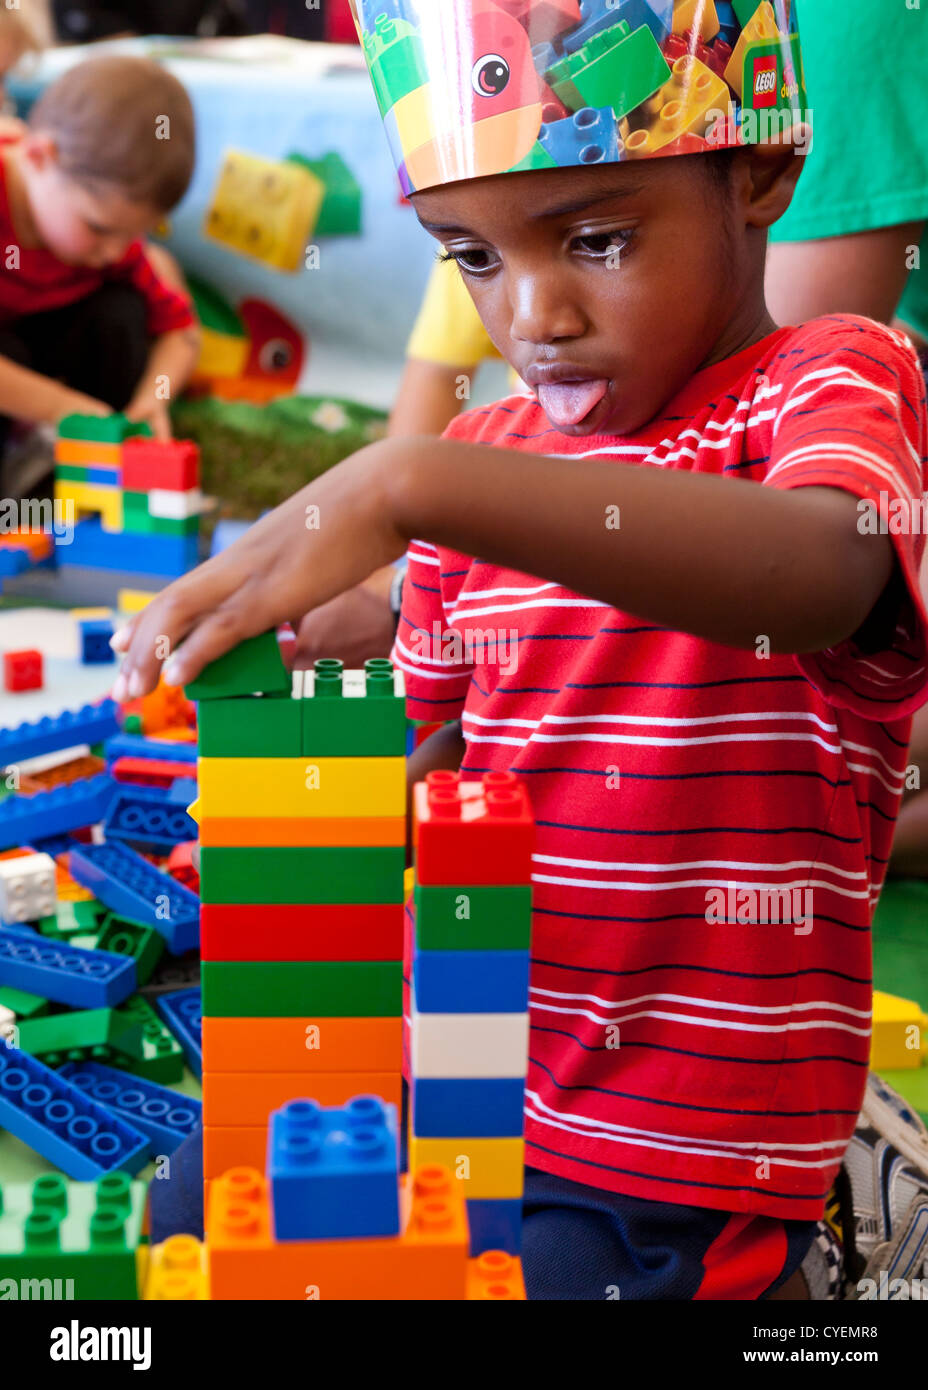 African-American boy playing with Lego bricks Stock Photo